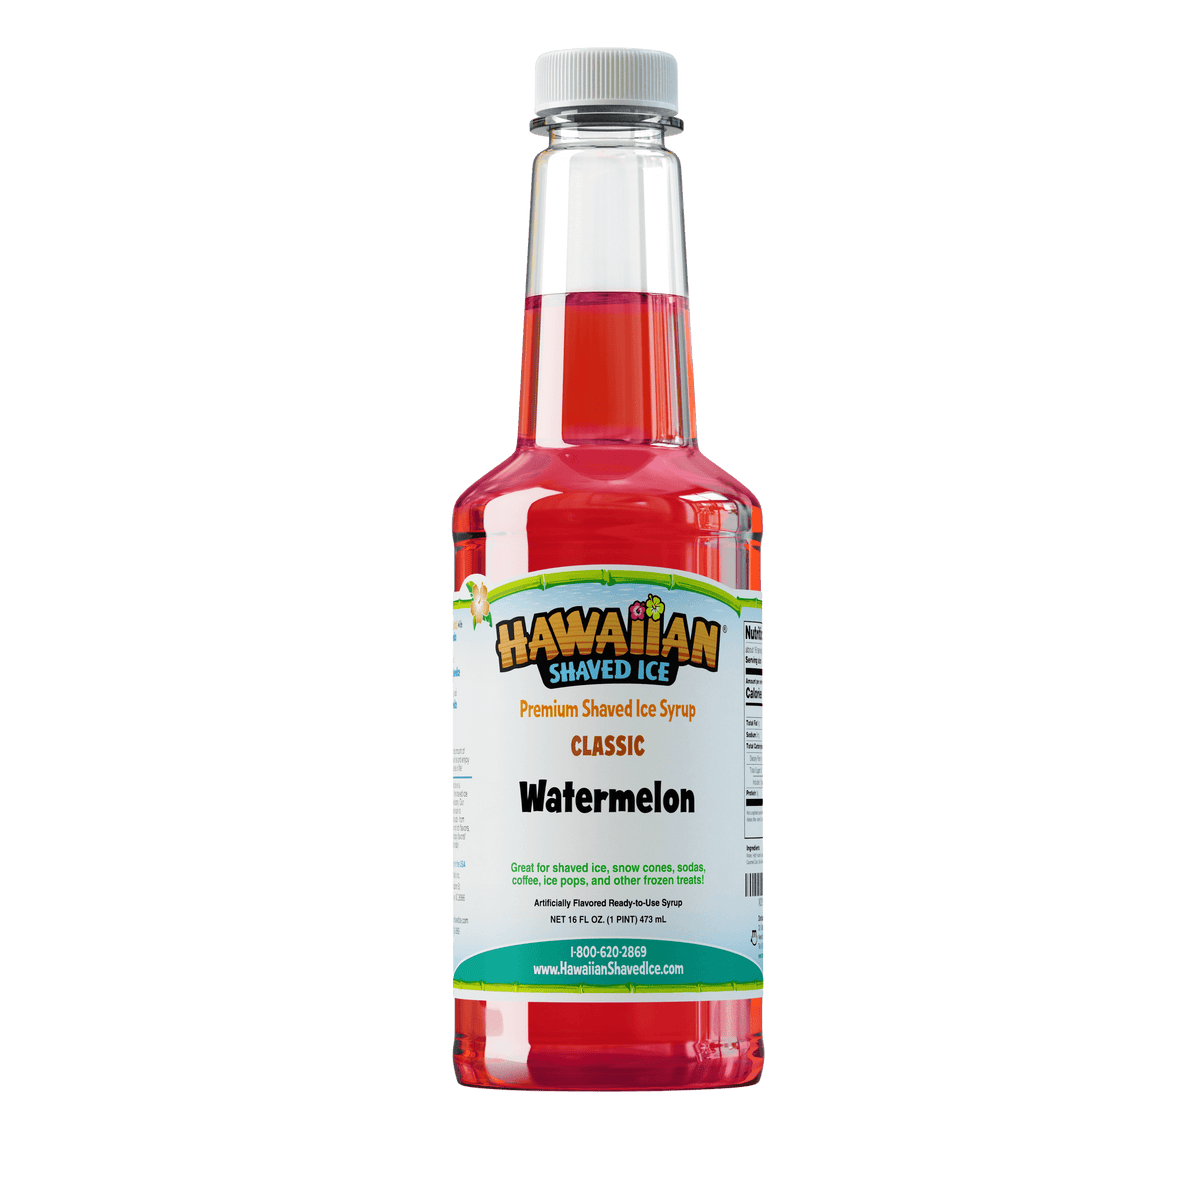 A pint (16-oz) of Hawaiian Shaved Ice Watermelon Flavored syrup, Red